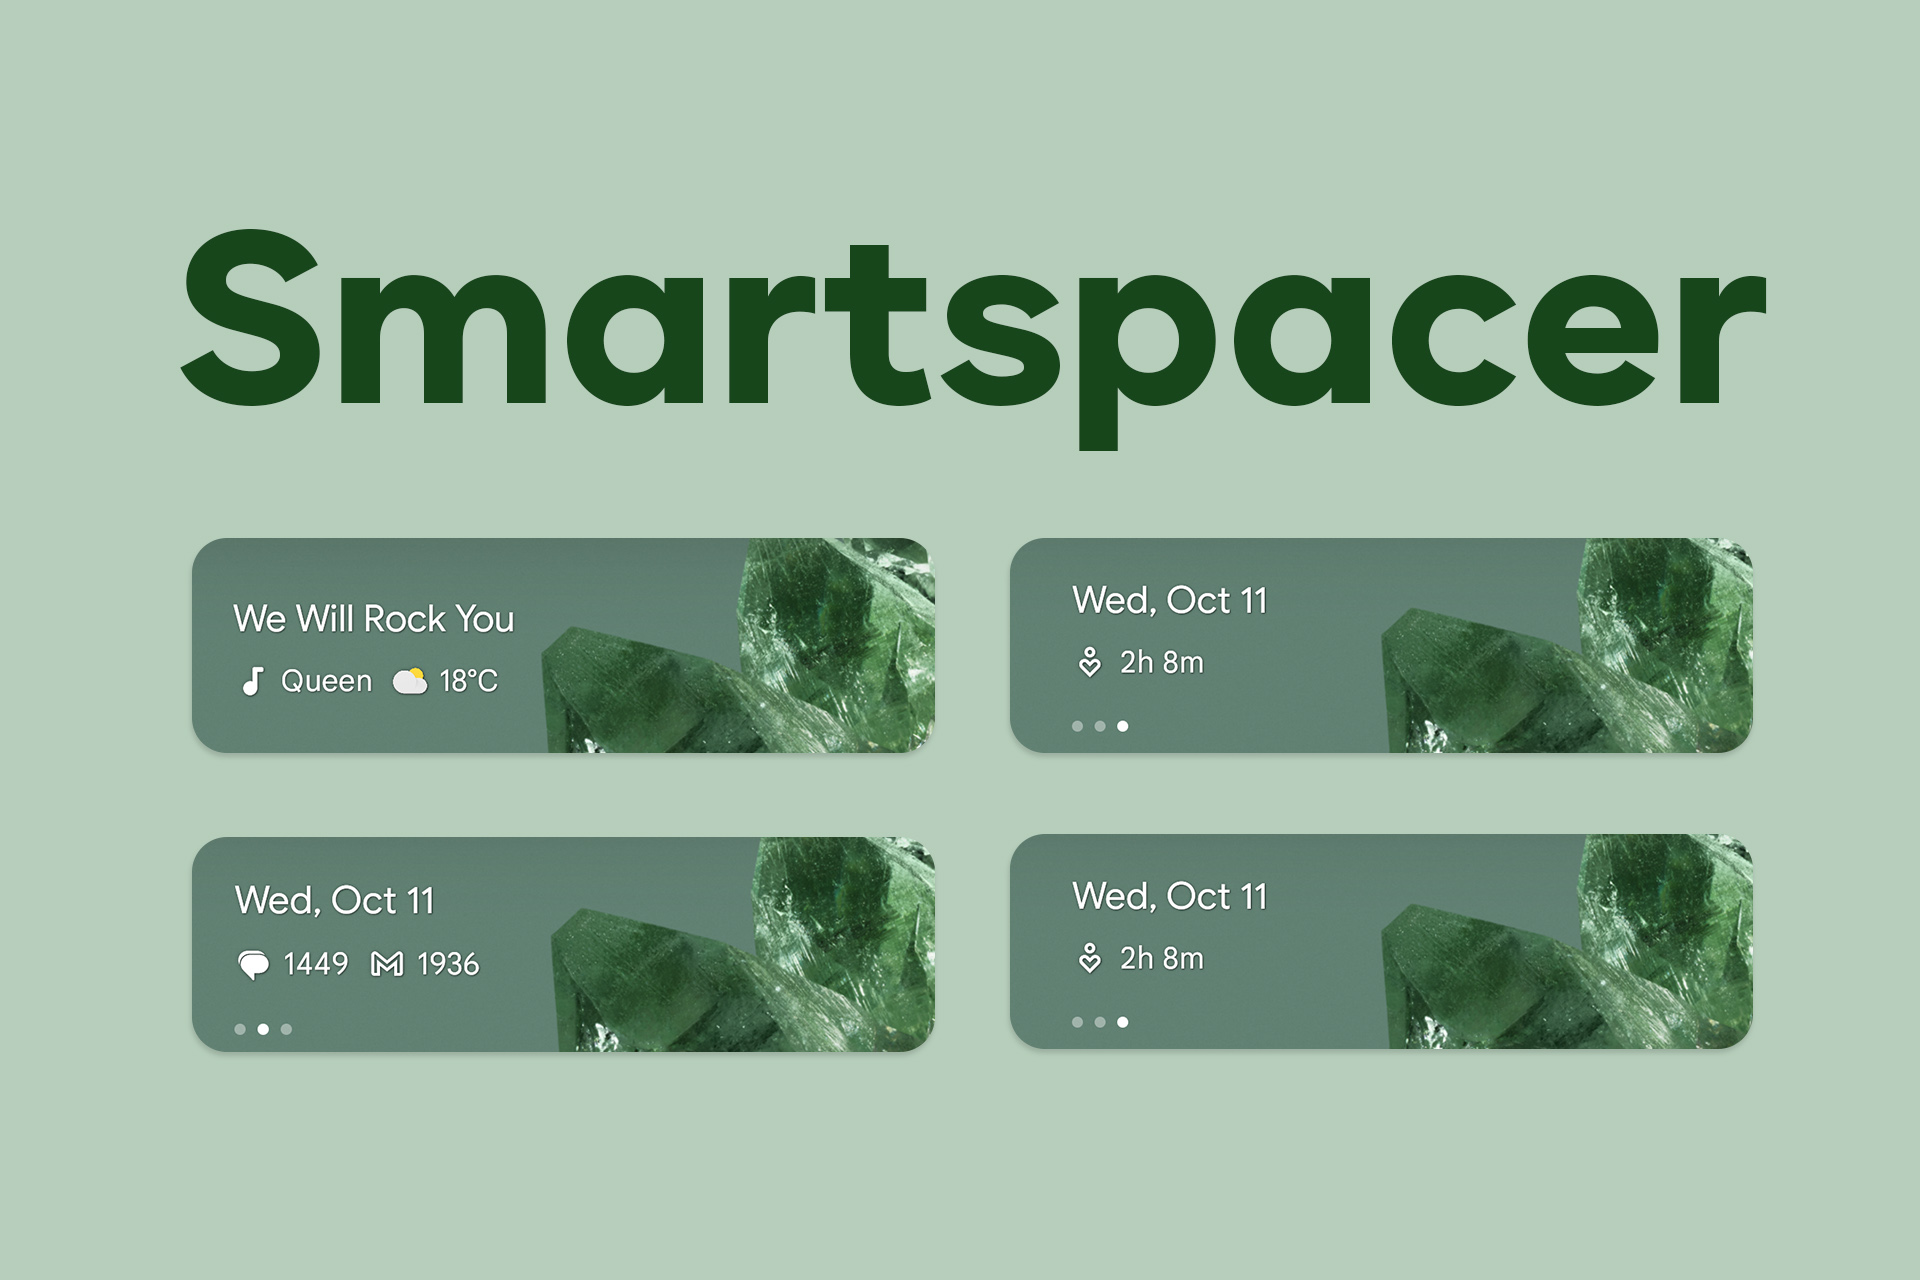 Customizing At a Glance is now possible with Smartspacer